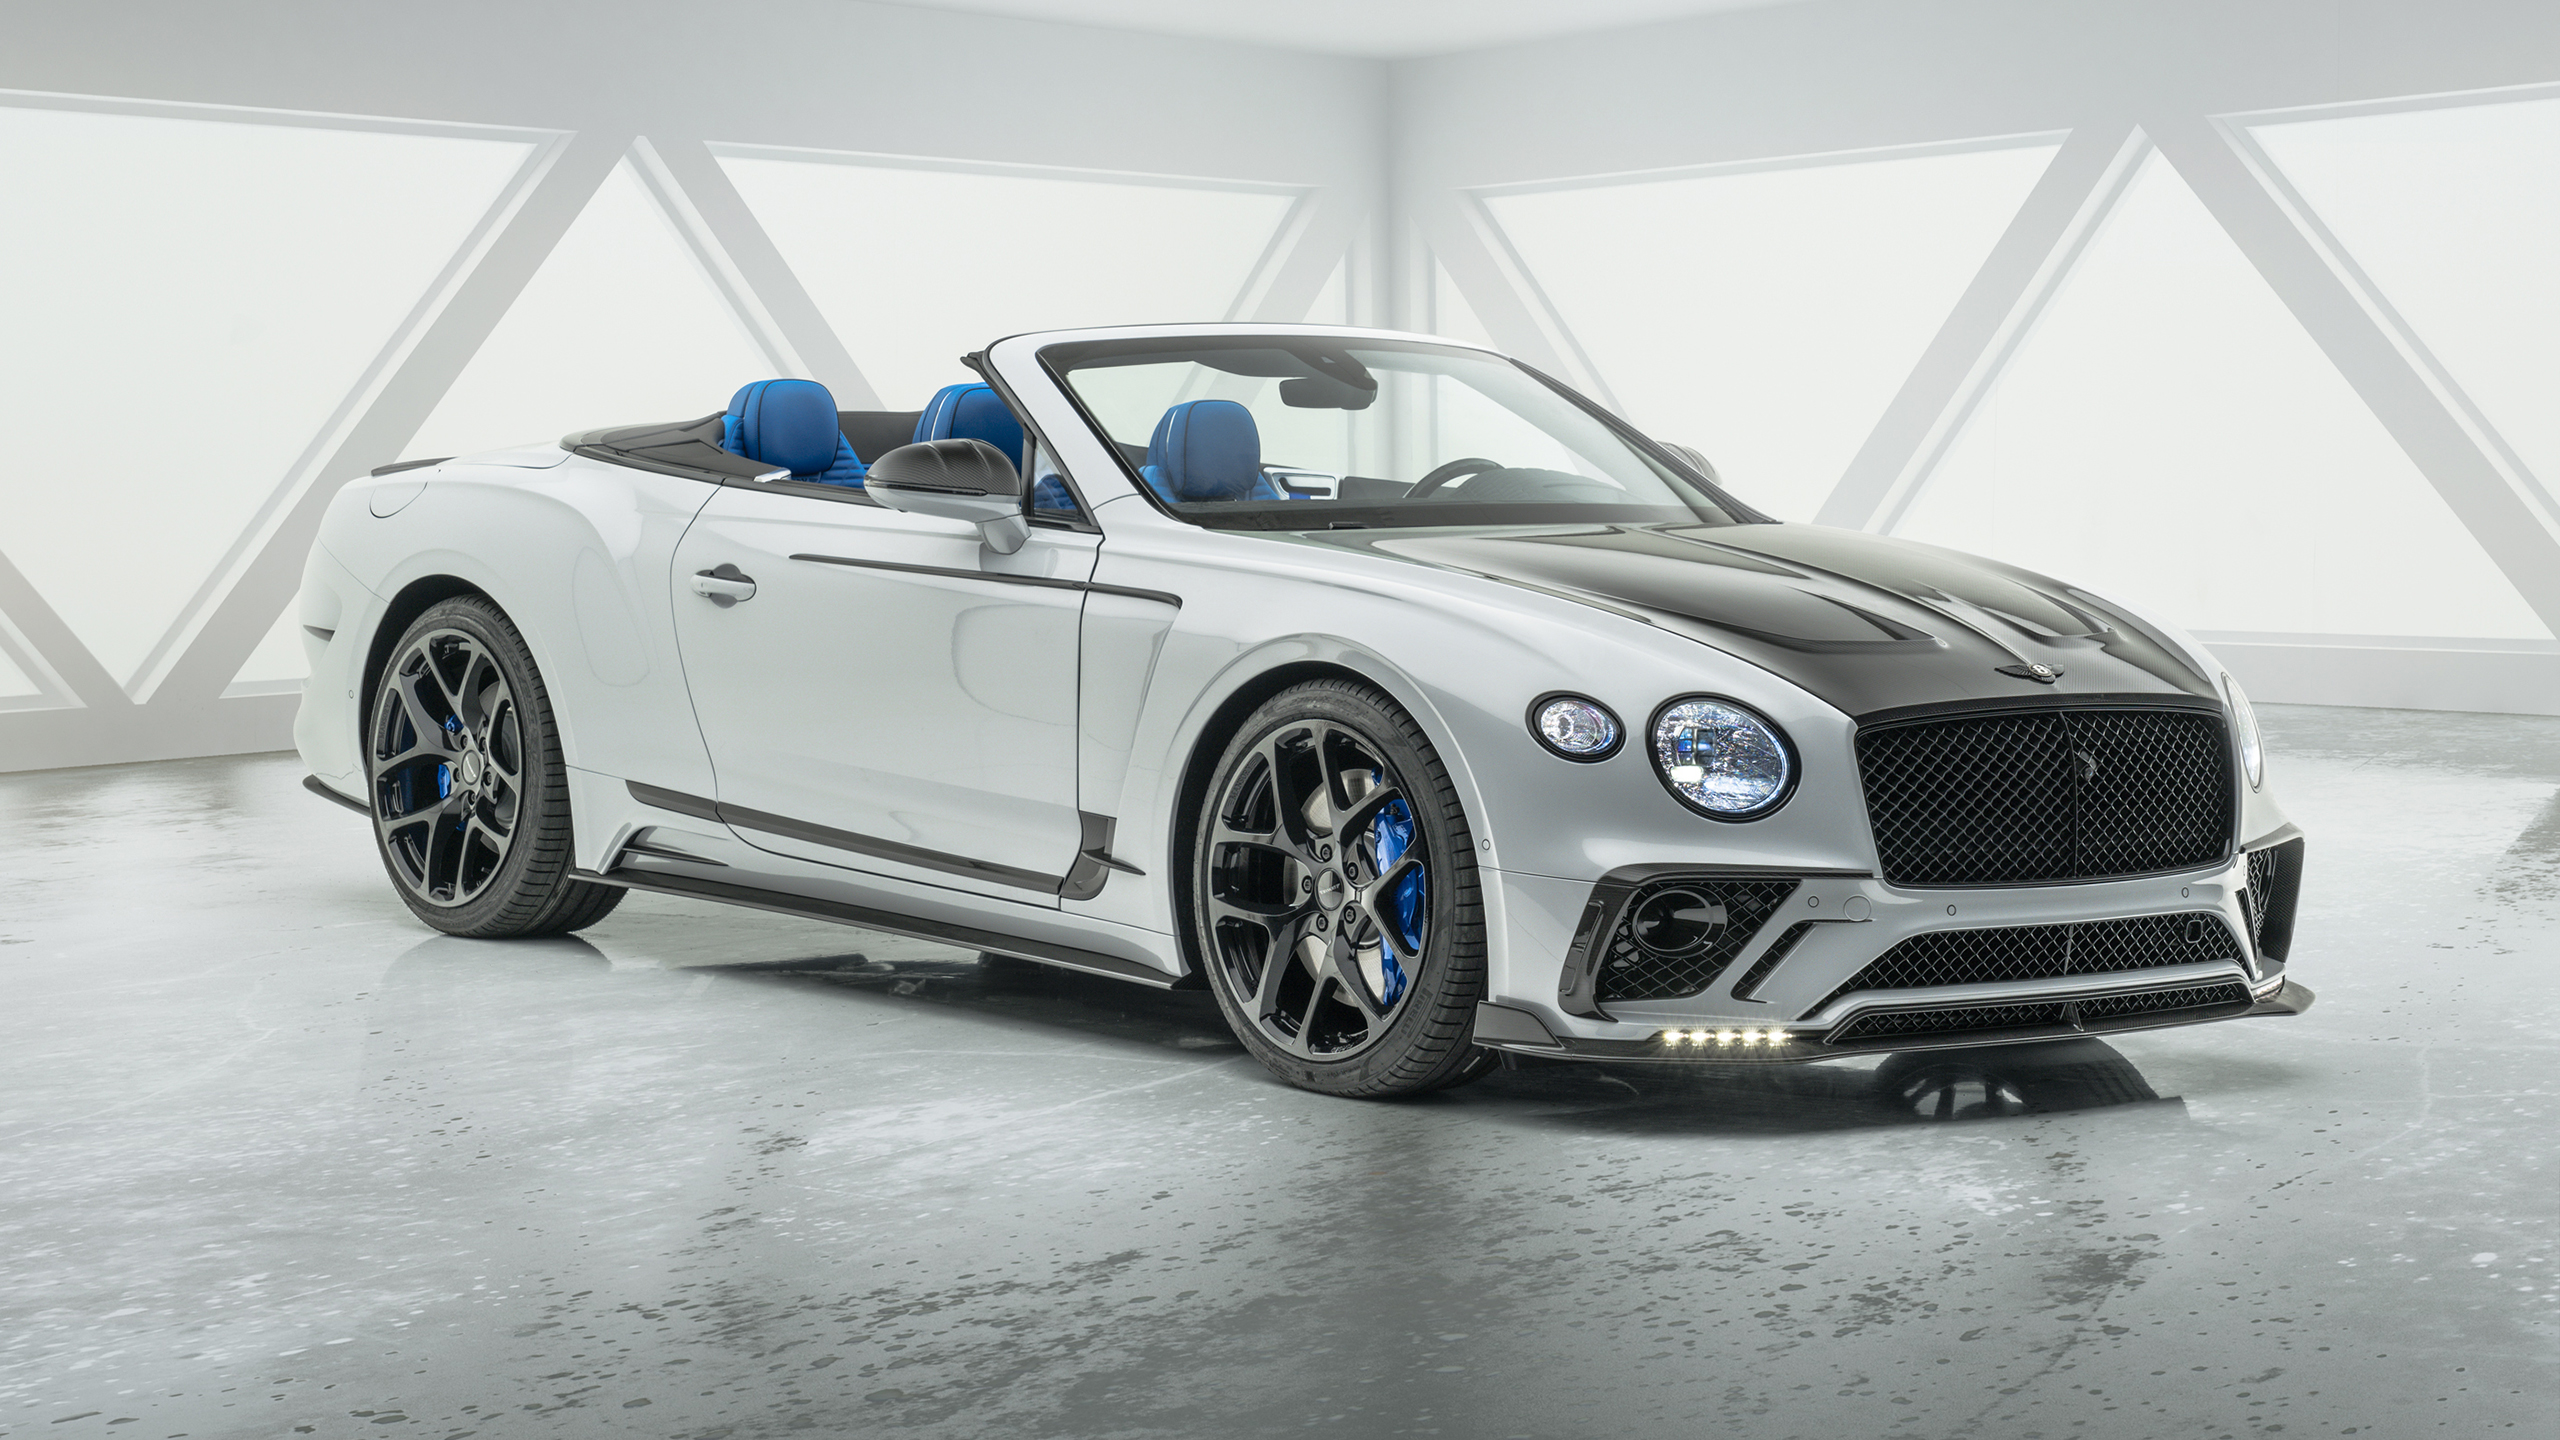 Bentley Continental Gt V8 Convertible By Mansory Convertible 2560x1440